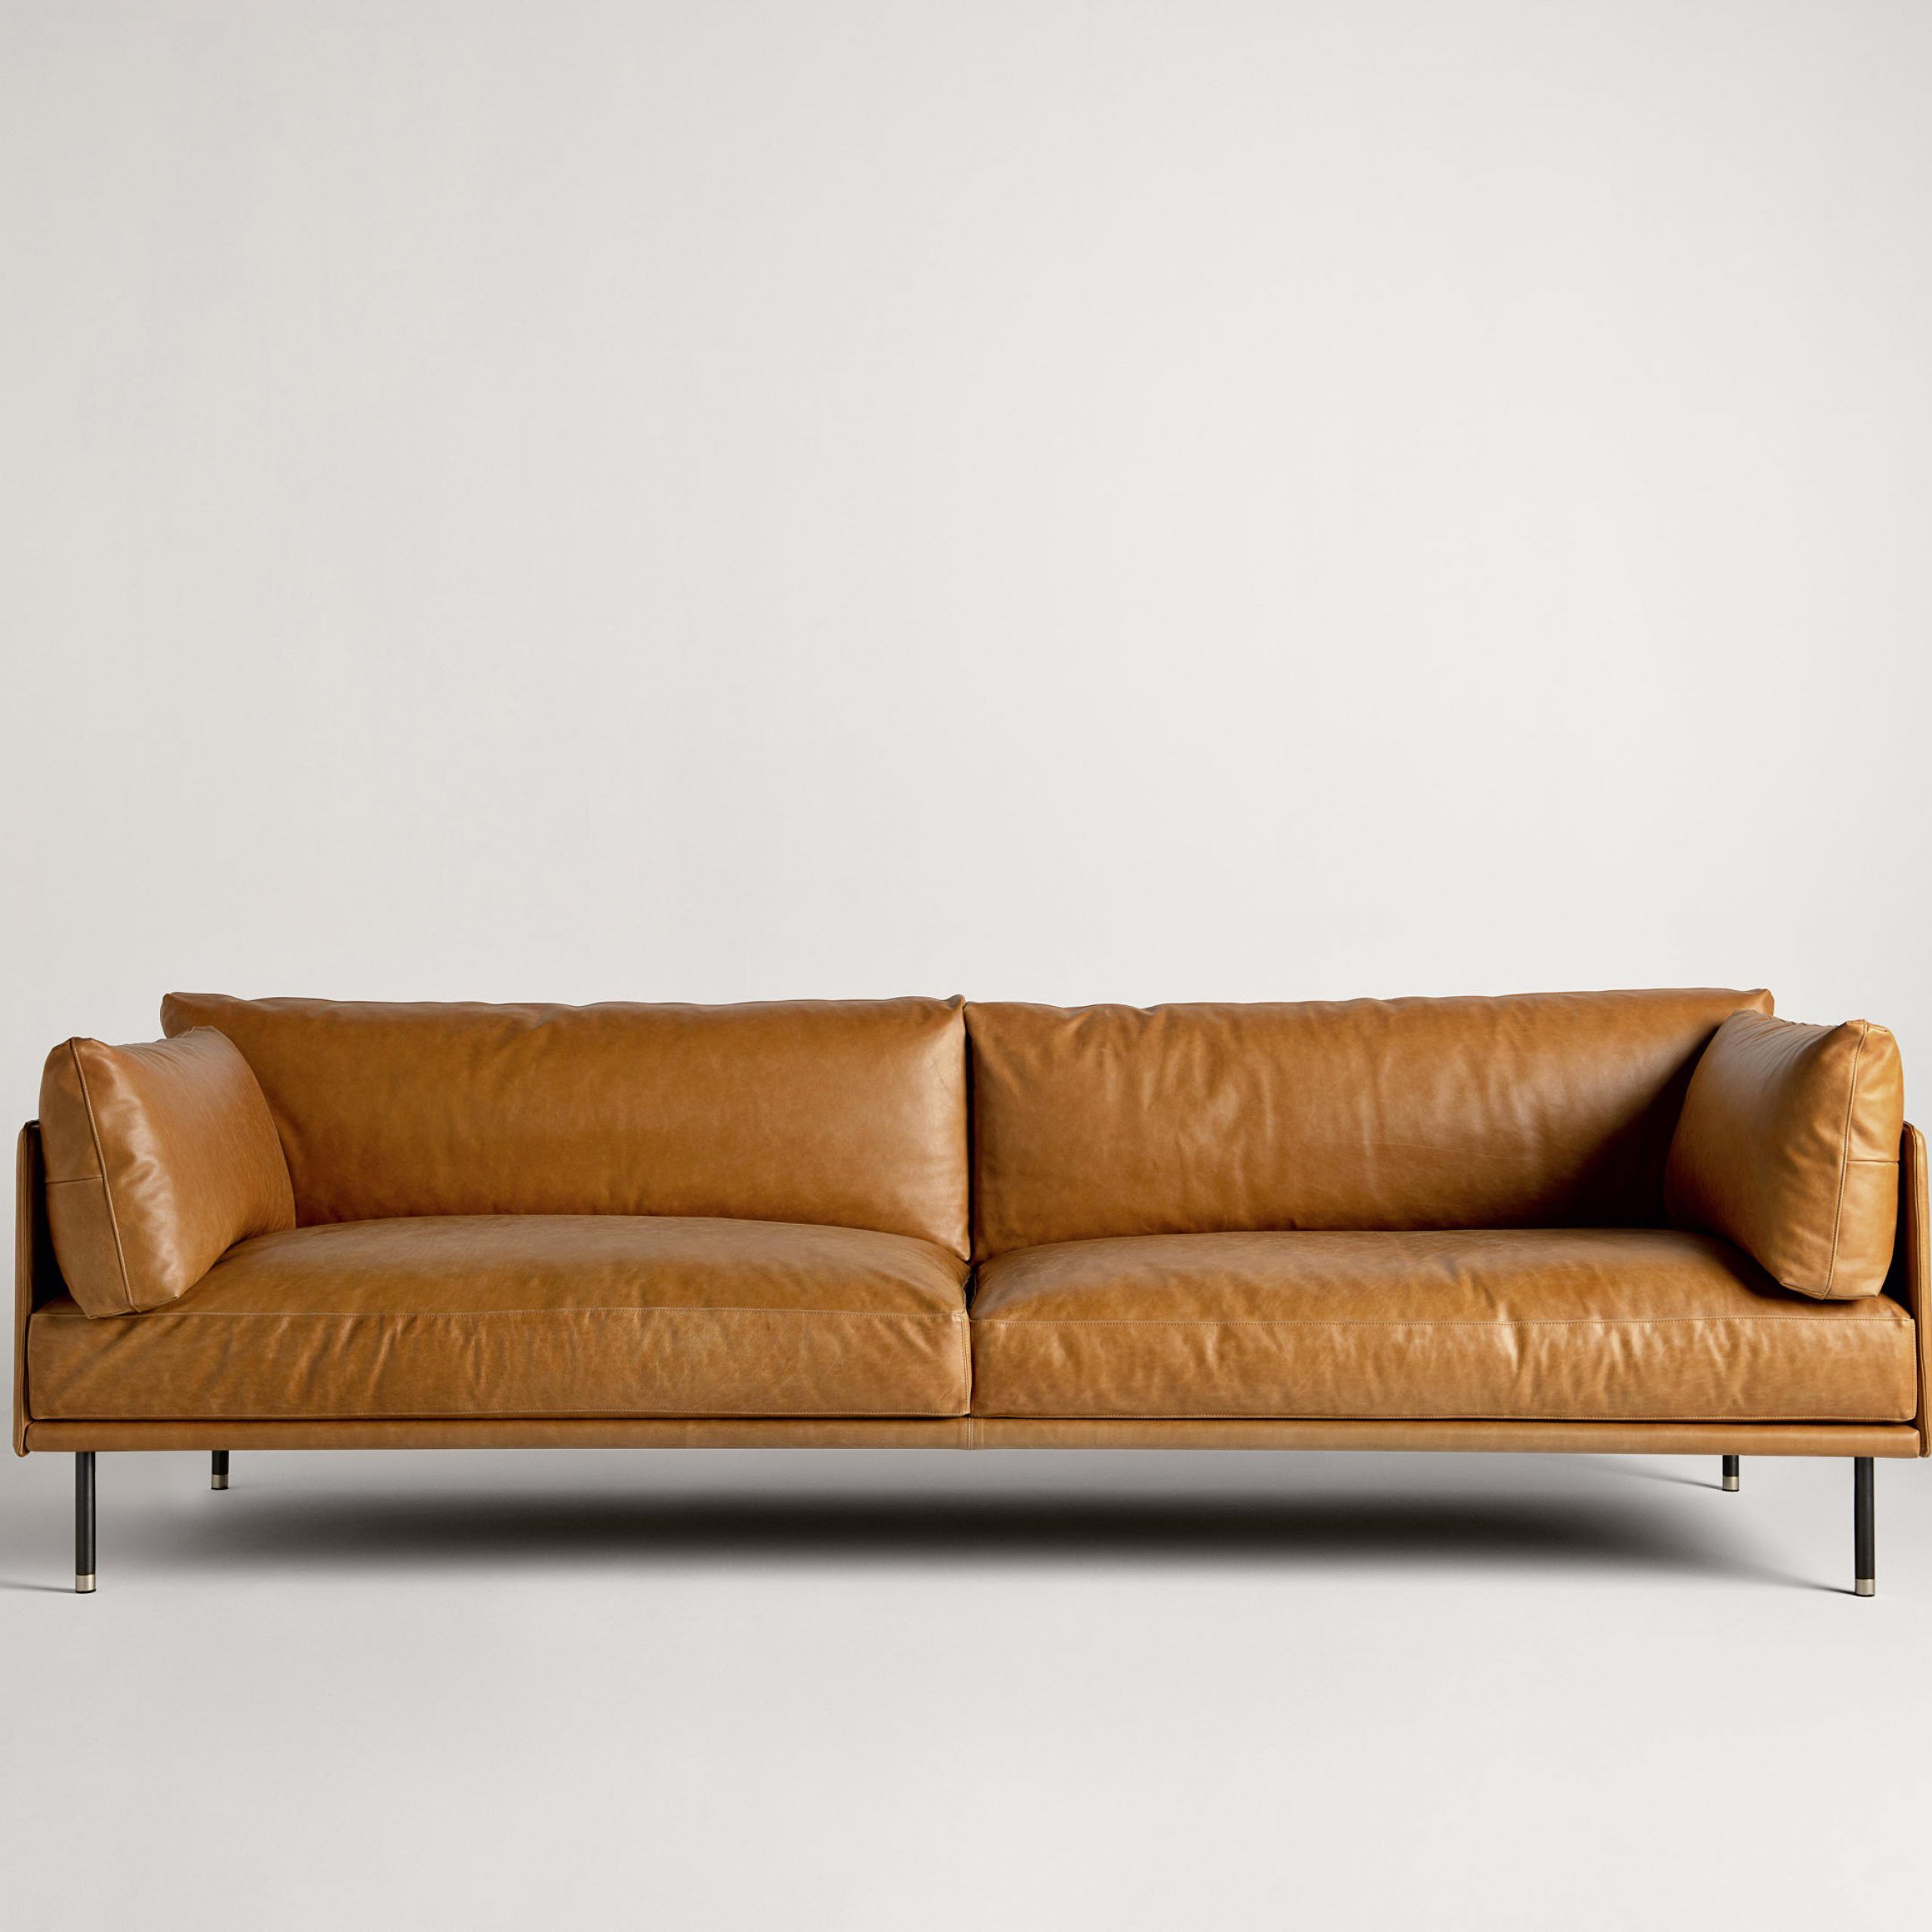 Wilton | Sofa – Sofas From Frag | Architonic With Wilton Fabric Sectional Sofas (View 10 of 15)